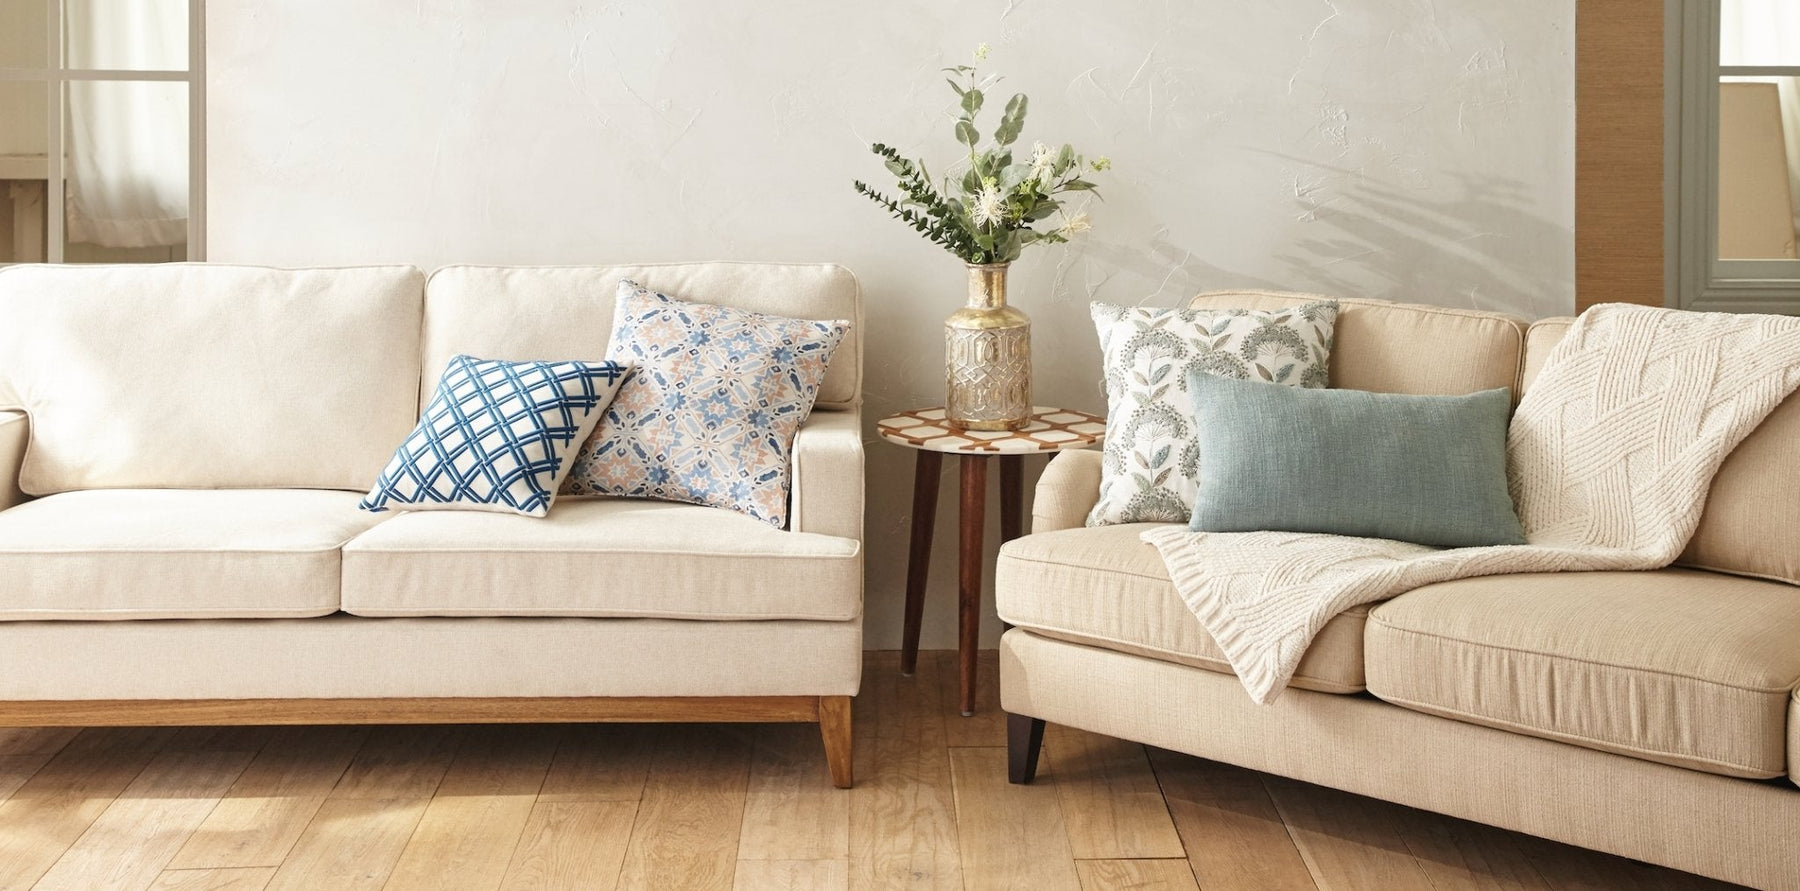 Types of Sofas: How to Buy a Sofa for Your Space - Pier 1